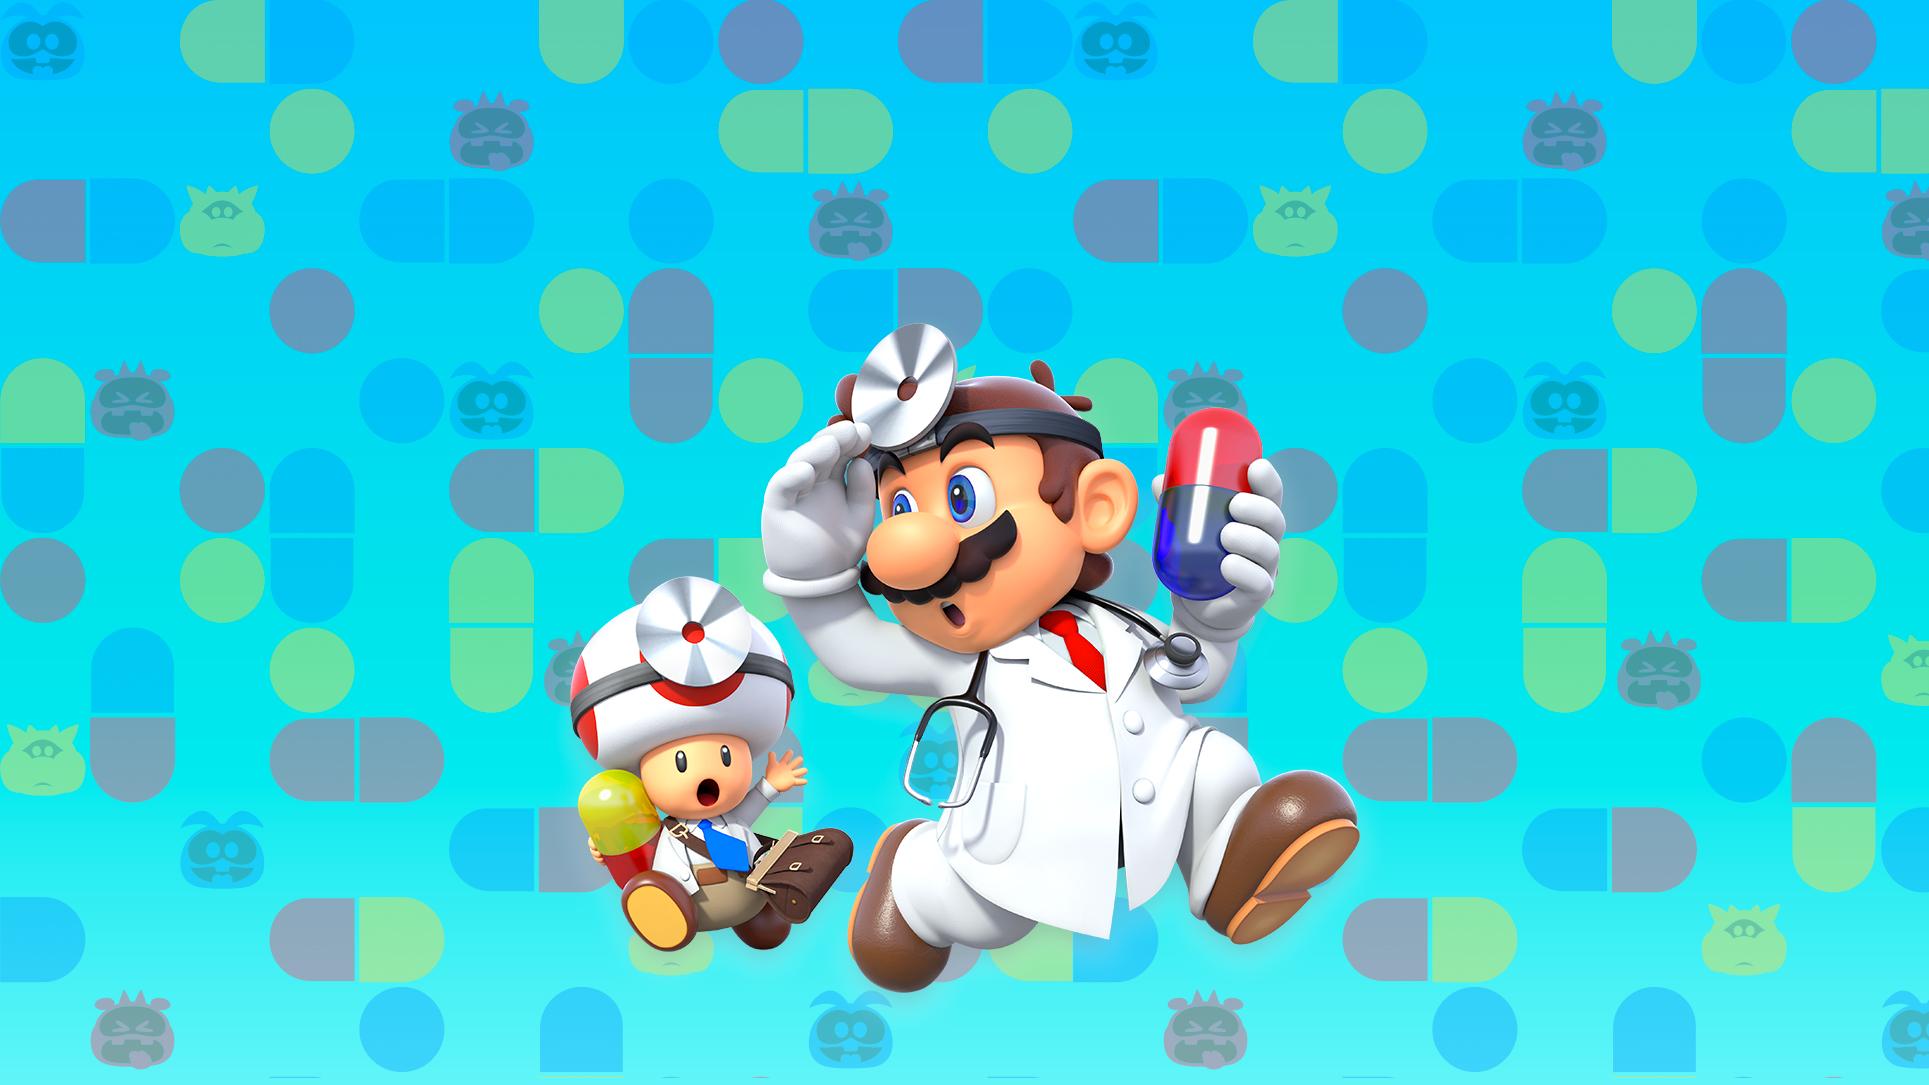 Dr. Mario World Release Date Set for July. Cat with Monocle